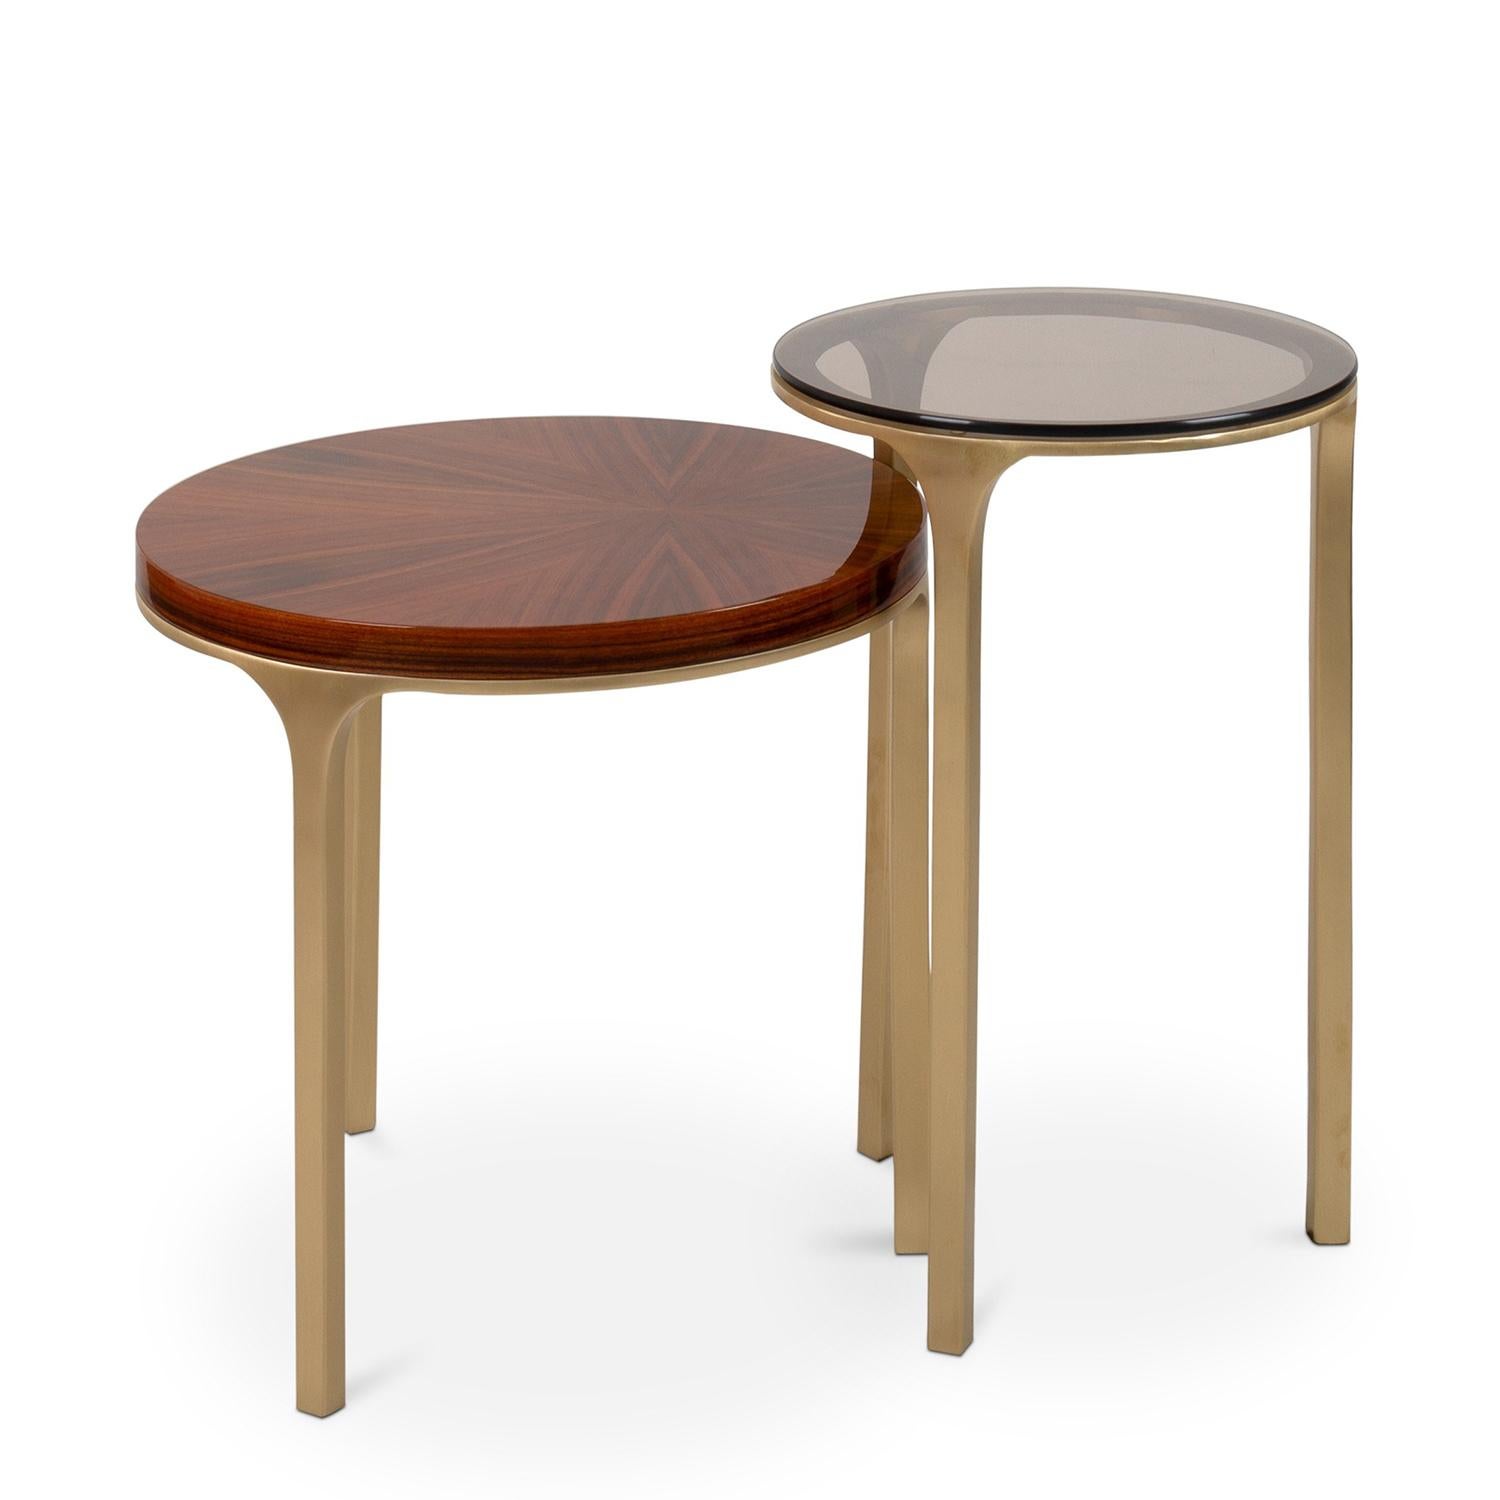 Step set of 2 side table with solid brass base 
in brushed finish. Medium side table is made with
a palisander veneered top and higher side table
is made with a bronzed tempered glass top.